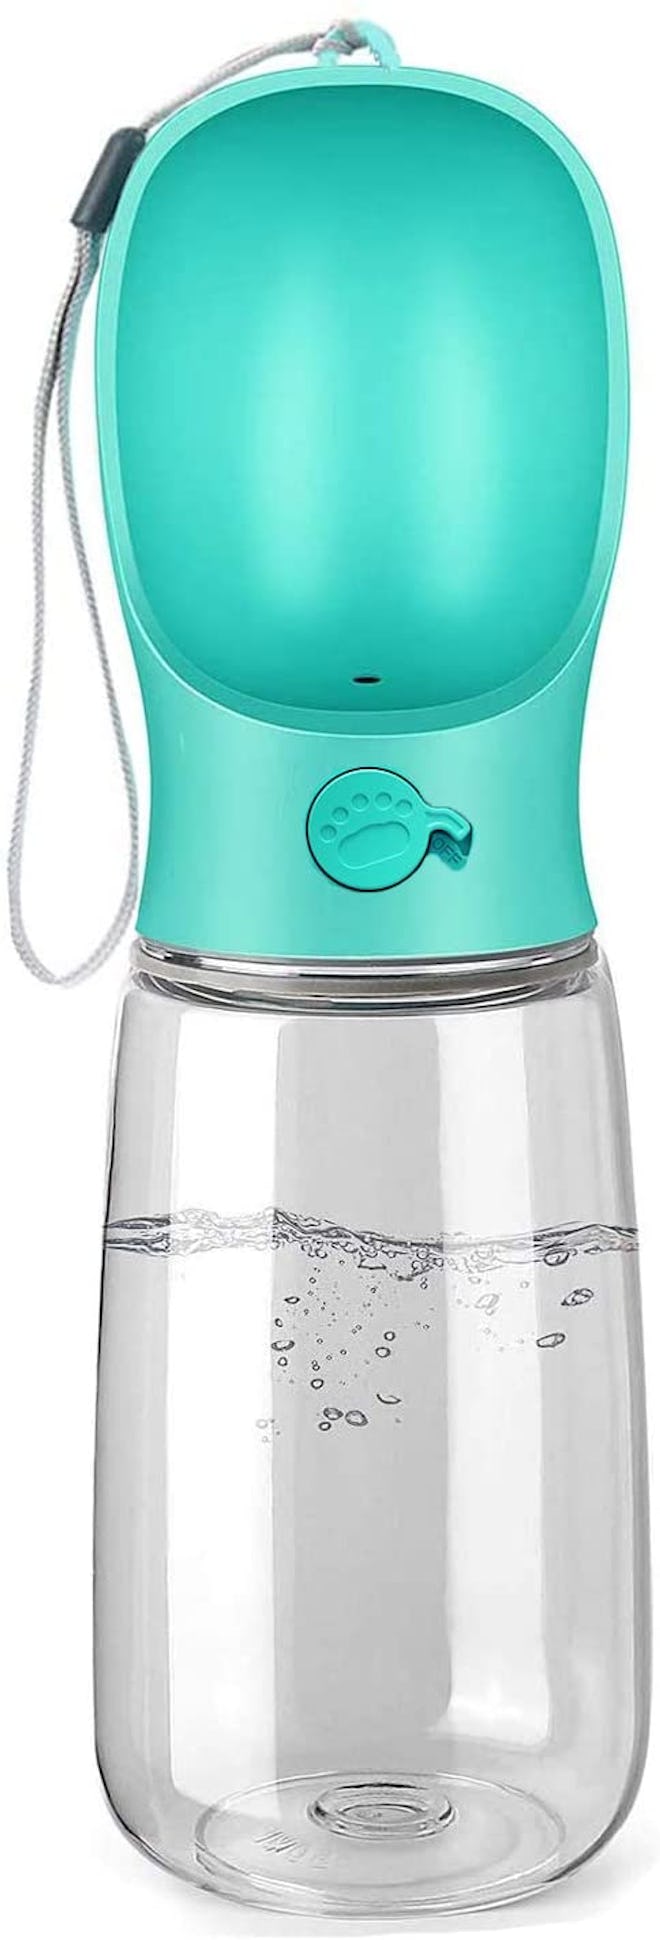 Kalimdor teal and clear dog water bottle